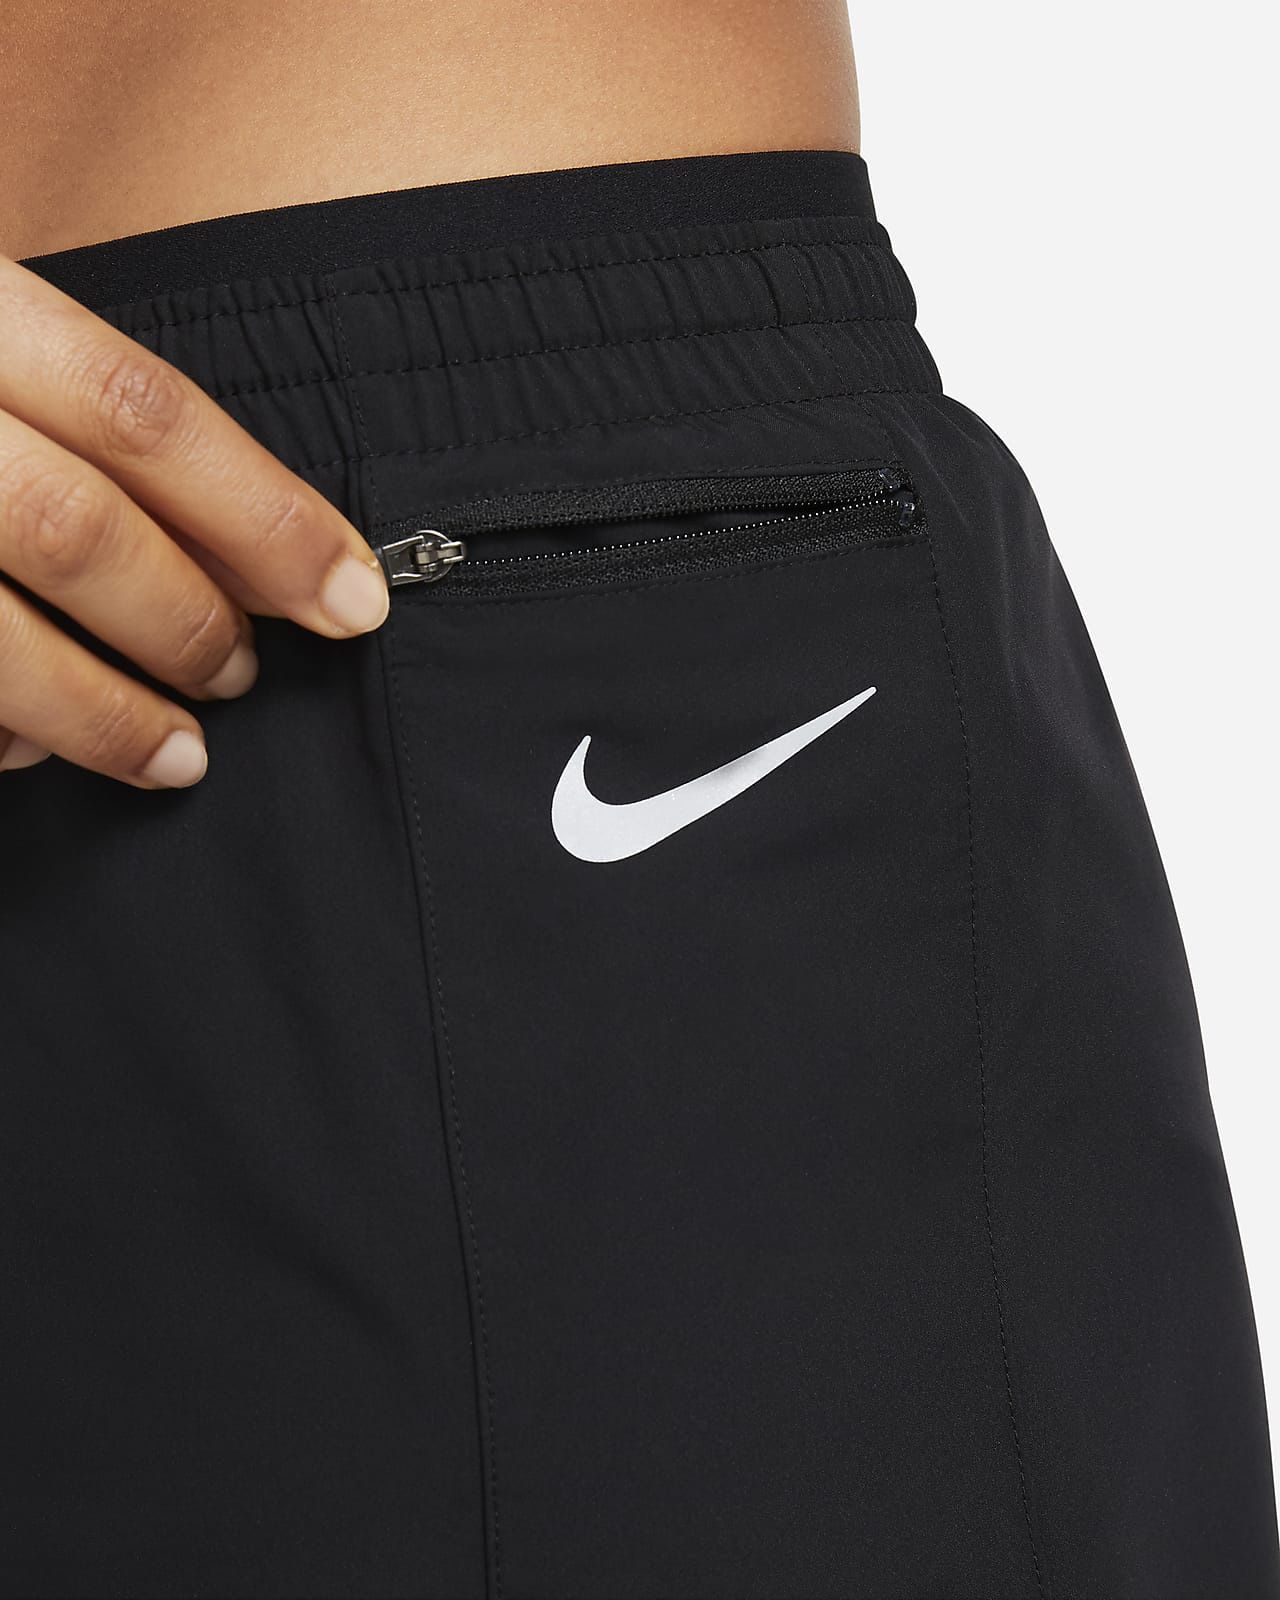 Nike Tempo Luxe Running Shorts - Black (CZ9576 010) Size Small Women’s ...